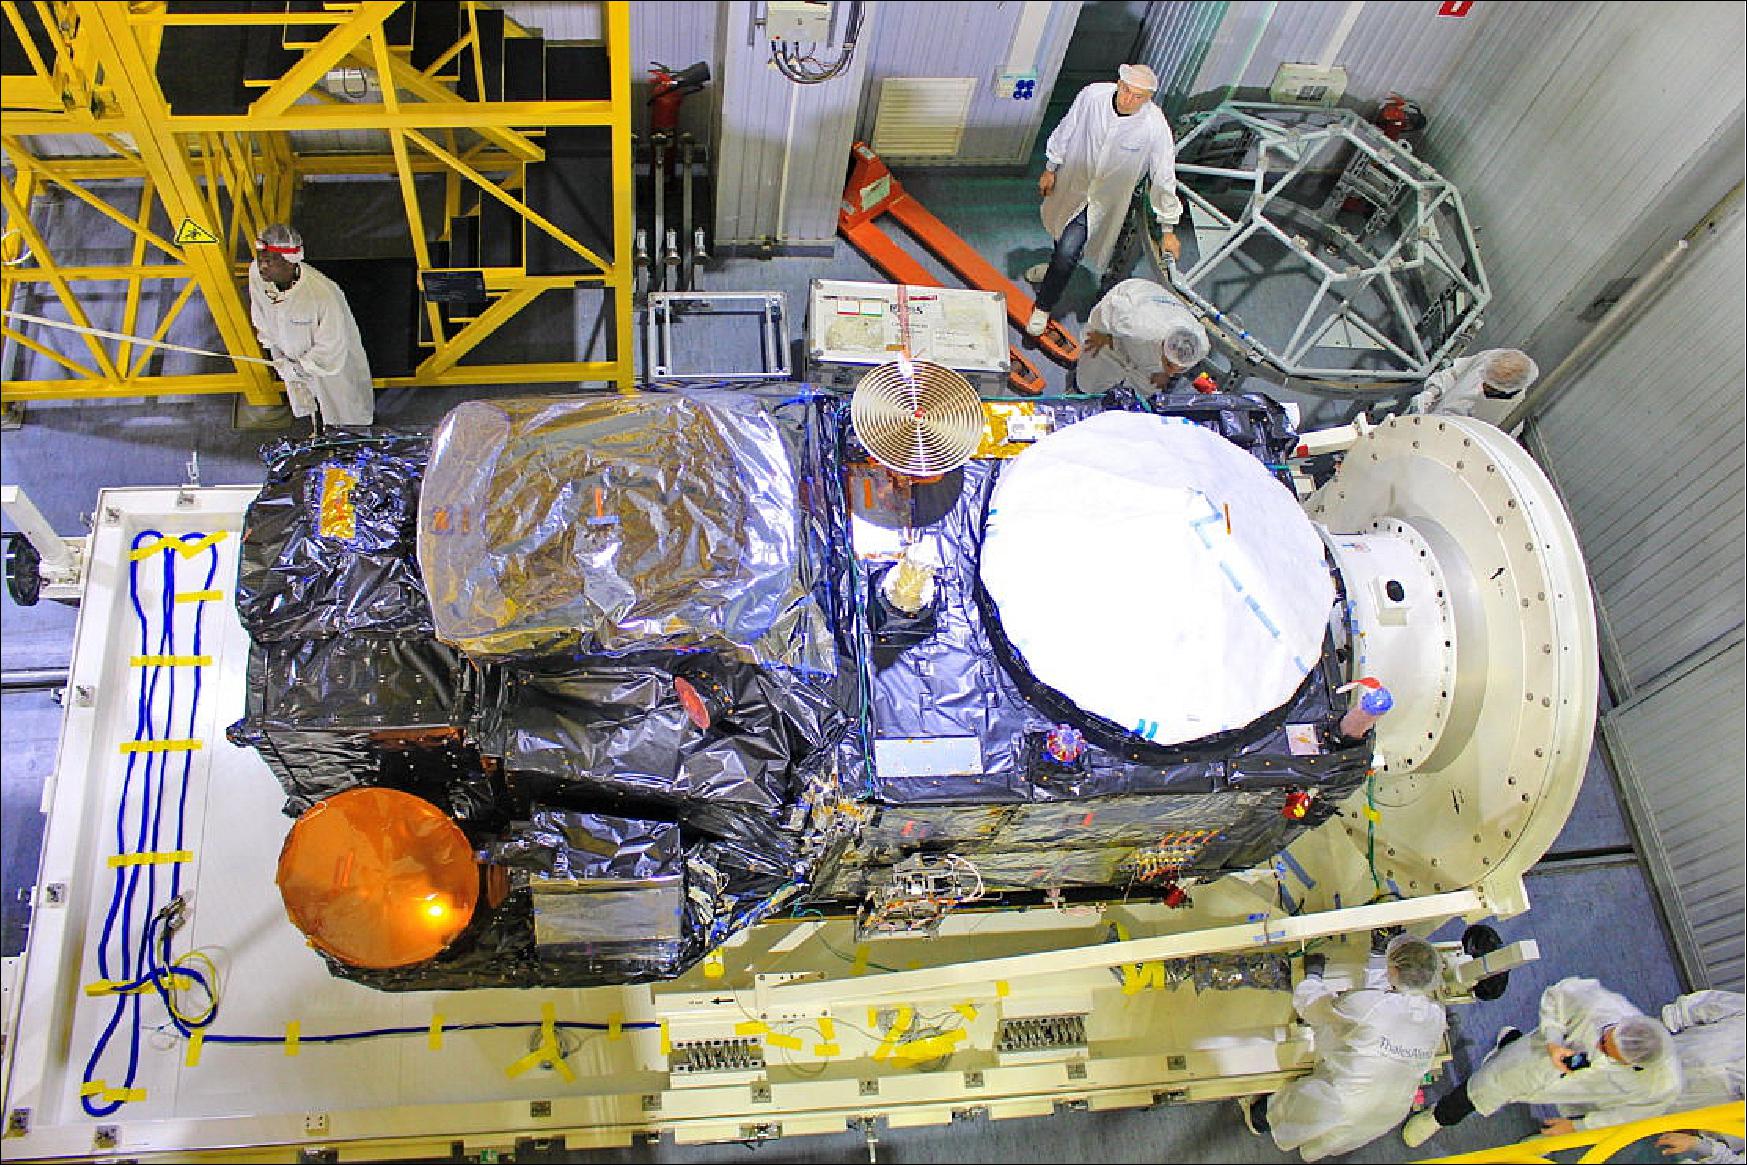 Figure 9: Following its arrival at Russia’s Plesetsk launch site, the Copernicus Sentinel-3B satellite has been removed from its transport container. The satellite will now be prepared for liftoff, scheduled for 25 April 2018. Its identical twin, Sentinel-3A, has been in orbit since February 2016. The two-satellite constellation offers optimum global coverage and data delivery. The mission has been designed to measure systematically Earth’s oceans, land, ice and atmosphere to monitor and understand large-scale global dynamics. It will provide essential information in near-realtime for ocean and weather forecasting (image credit: ESA)